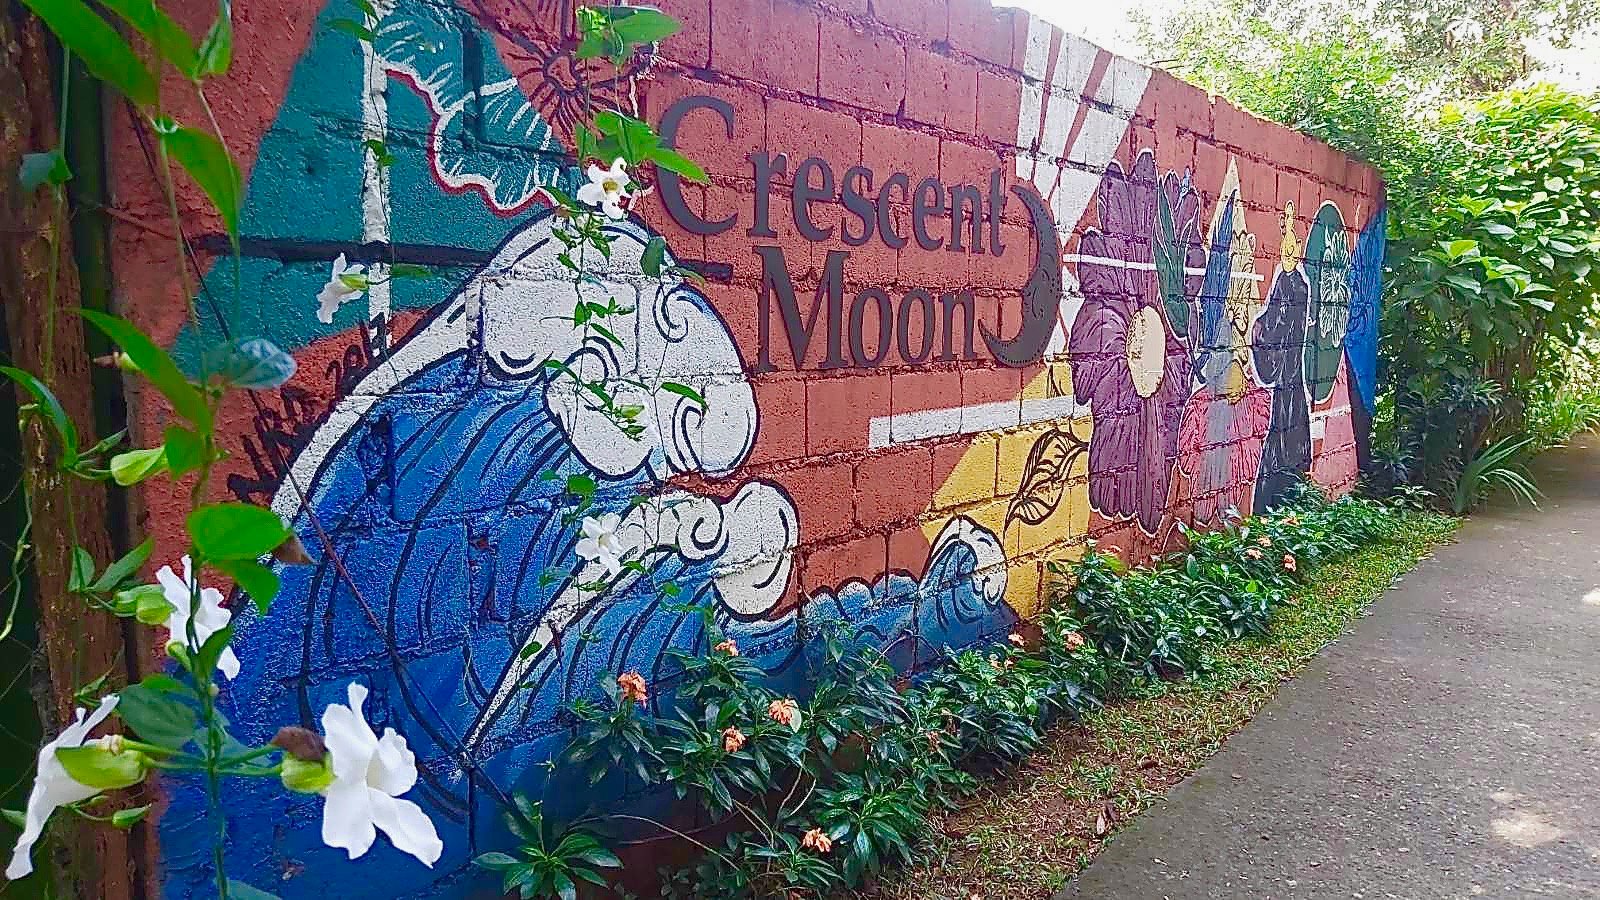 7 Cafes and Restaurants in Rizal - The Crescent Moon Cafe and Pottery Studio